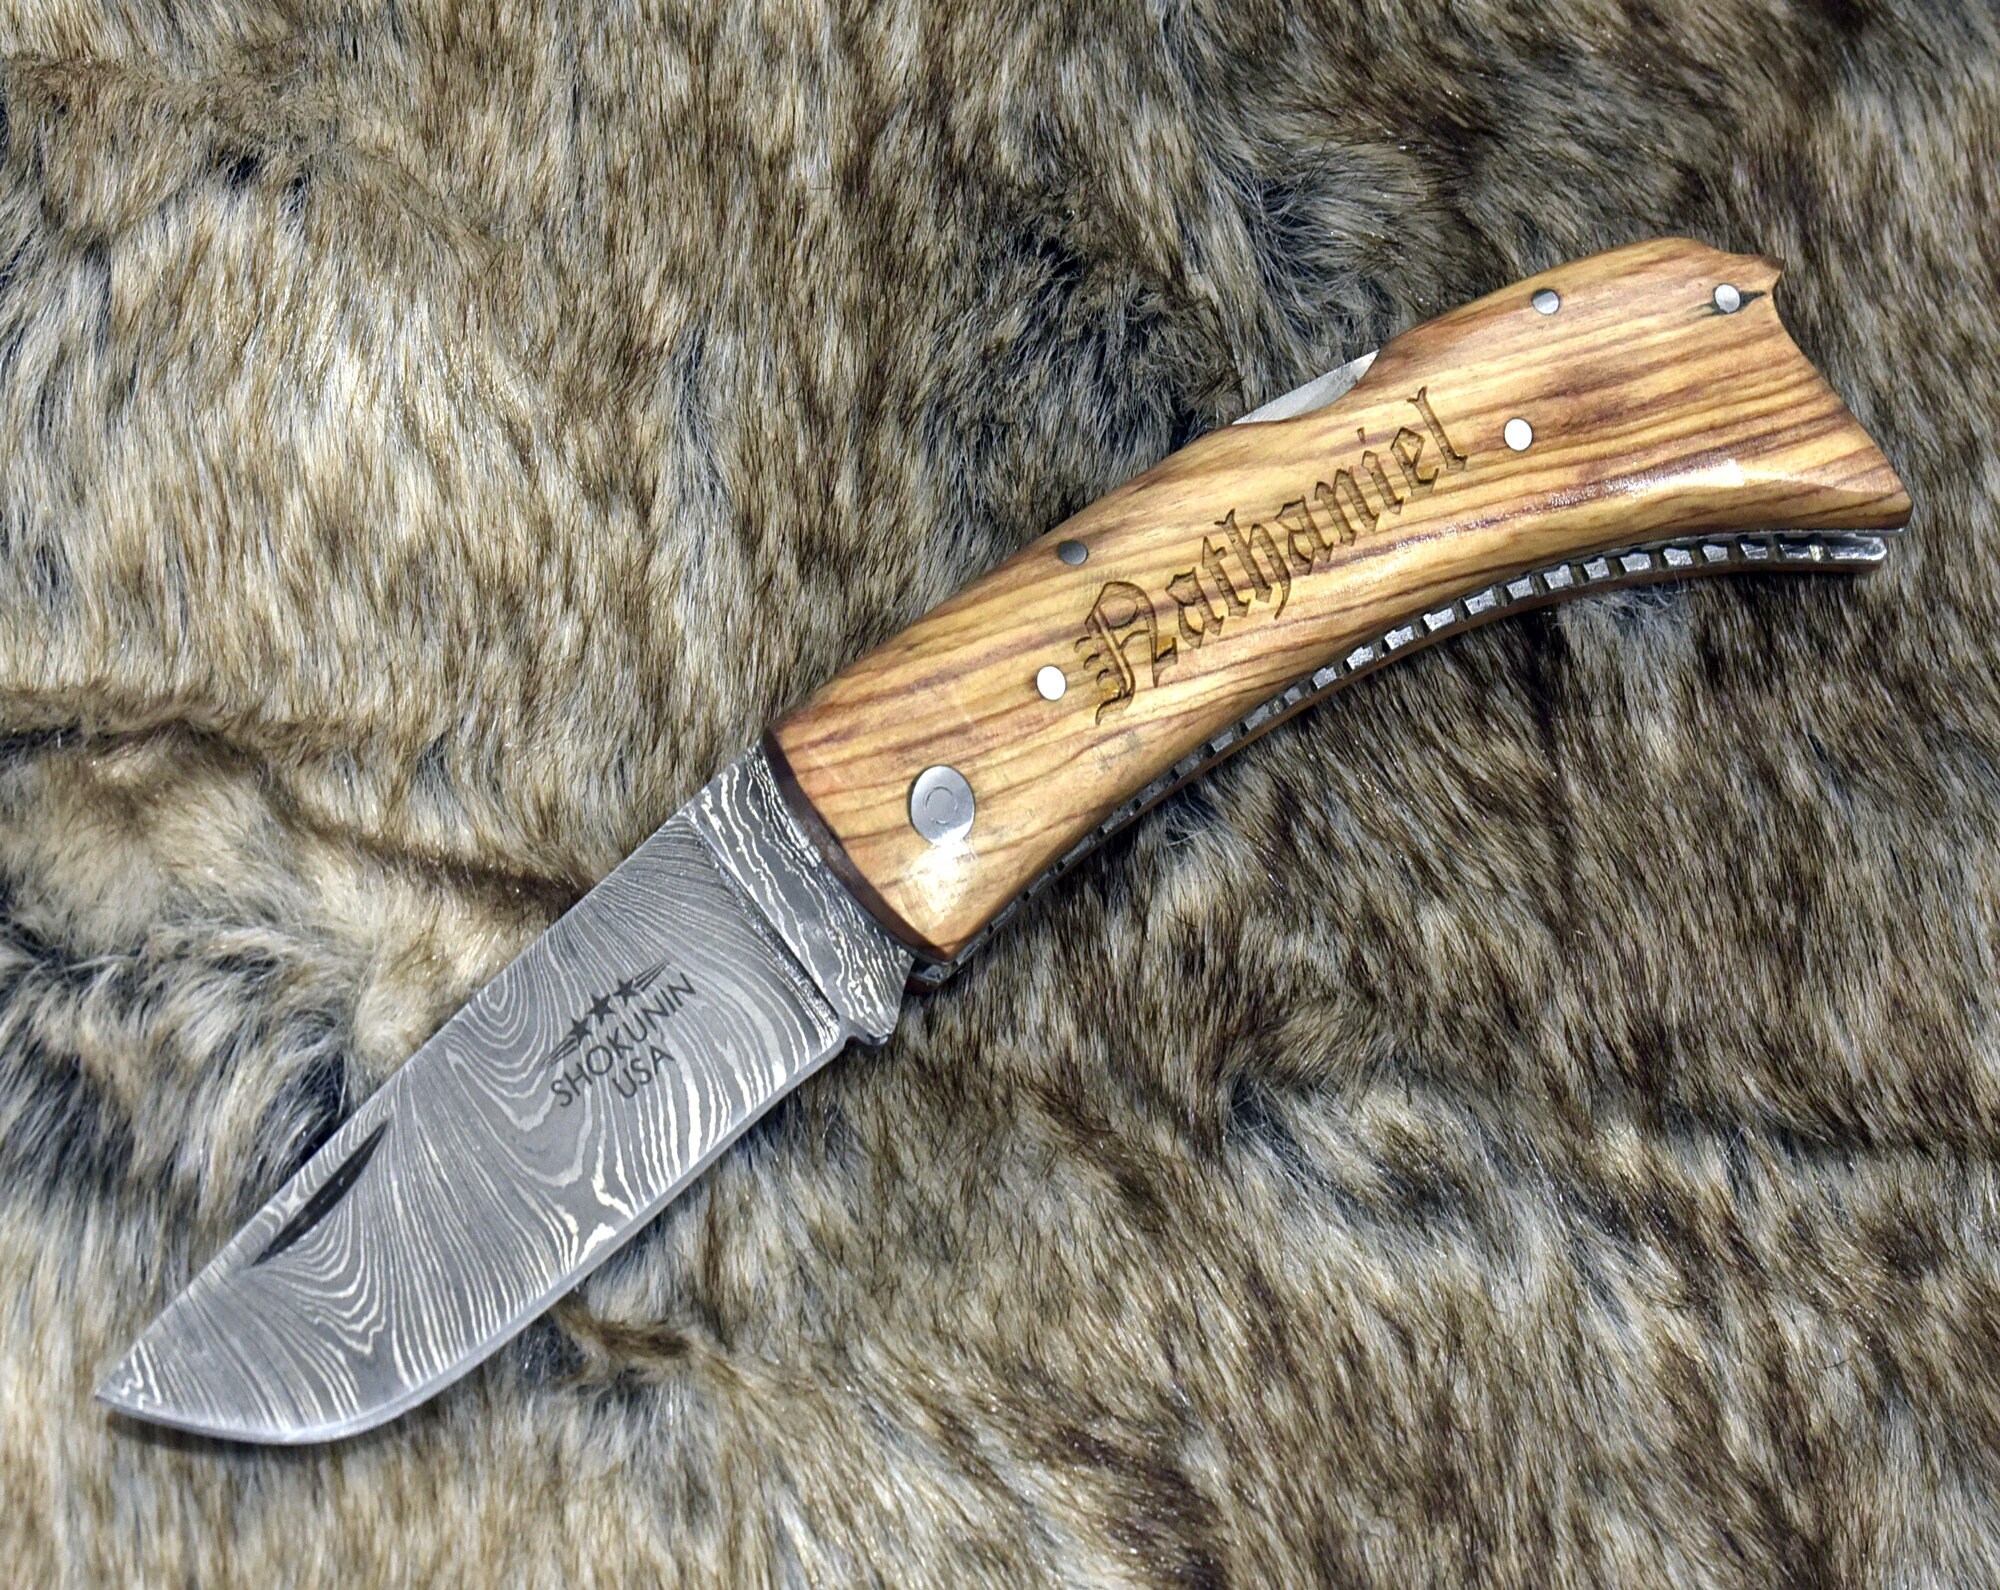 HUNTING knife, HAND FORGED Damascus Steel Knife Skinner Camping Utility